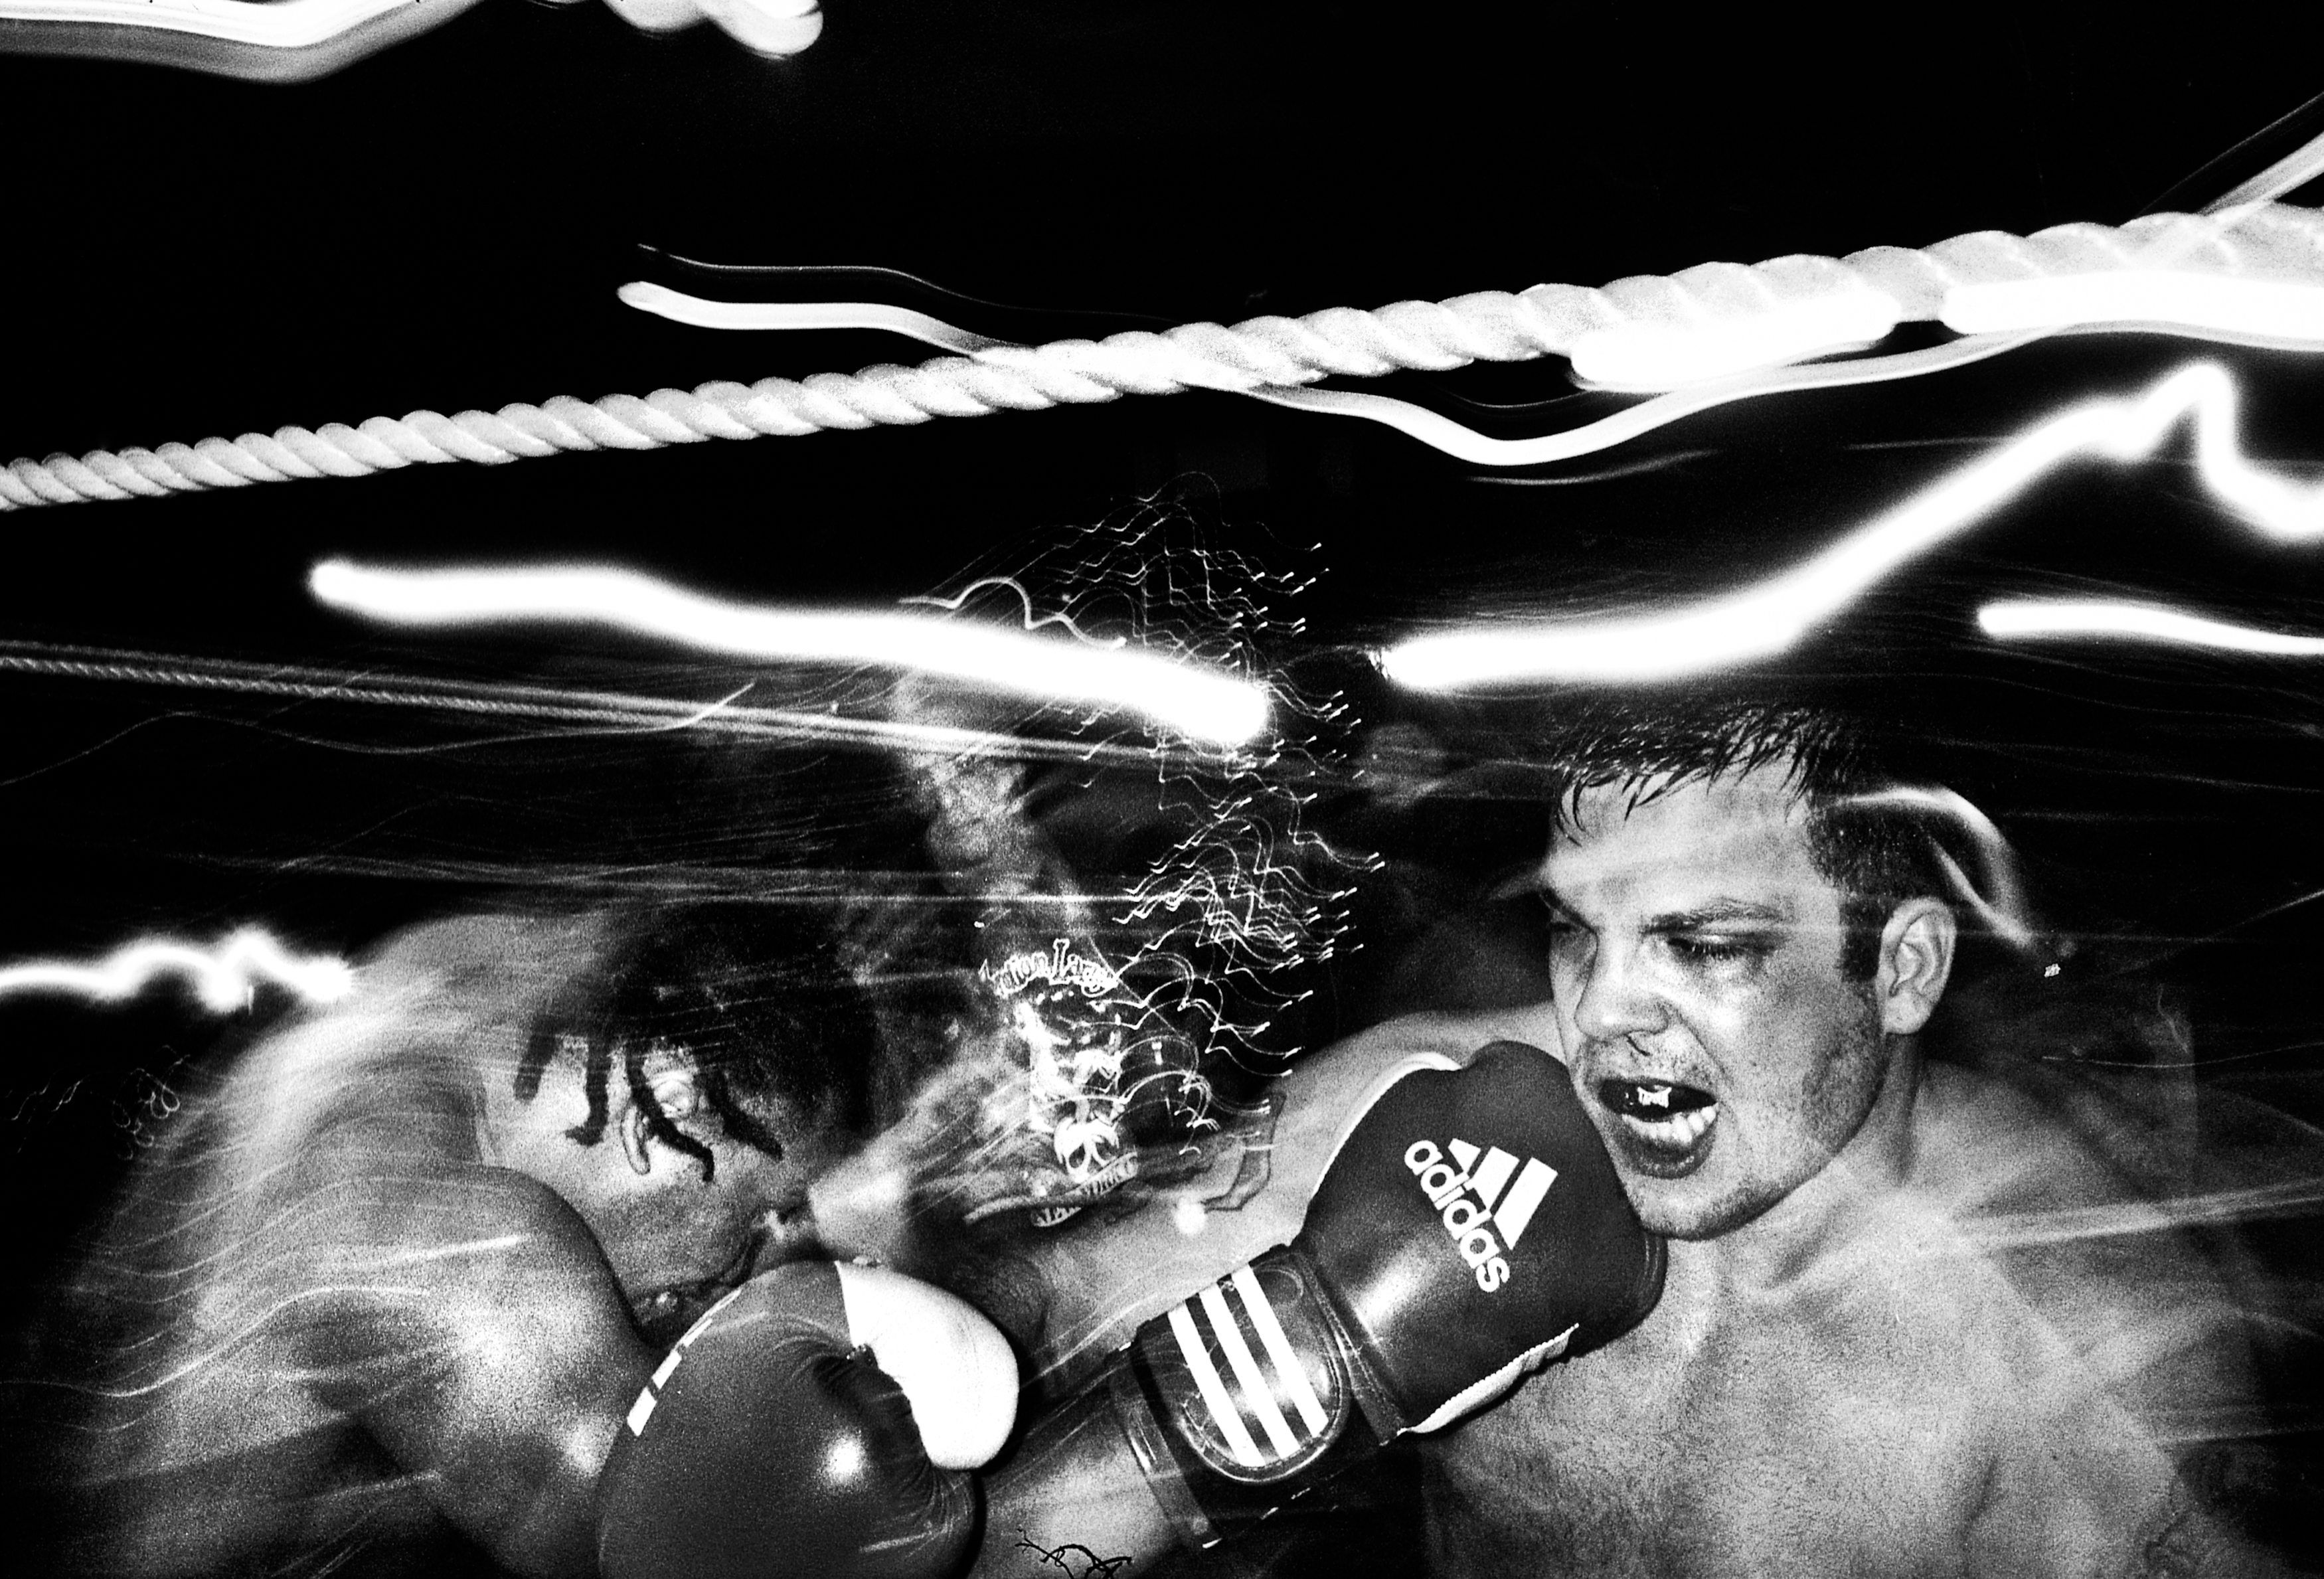 Anthony and other boxer connecting punches. (Old Fire House Soho, February, 2012)